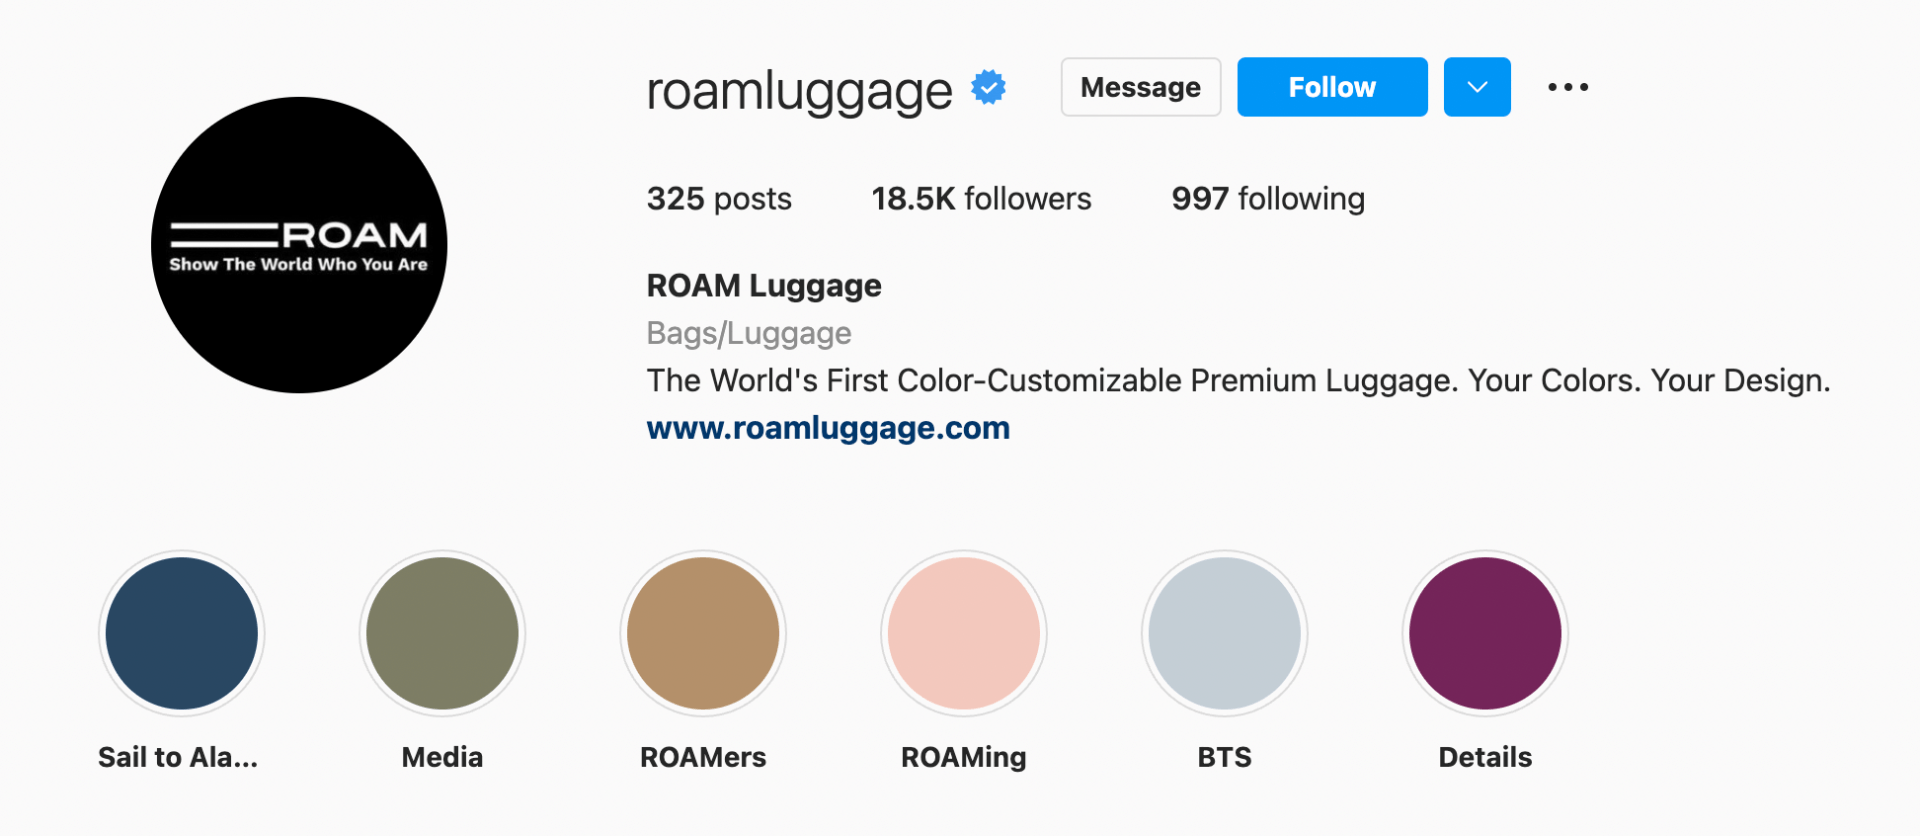 roam instagram page black roam logo verified page link to website and several highlight reels showcasing the luggage brand